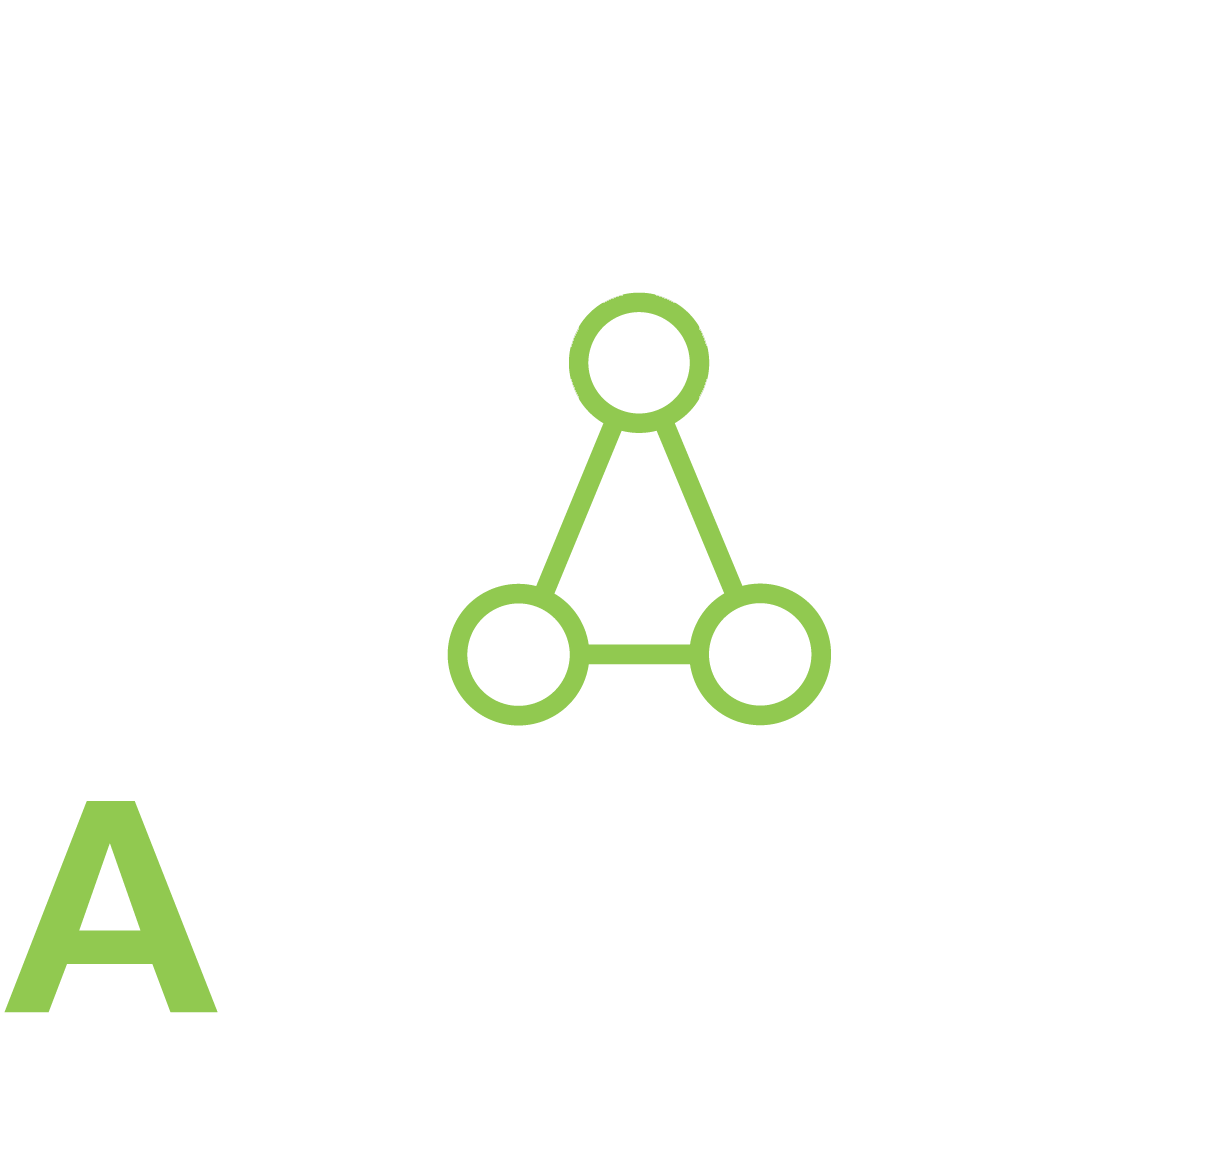 The Angent Group